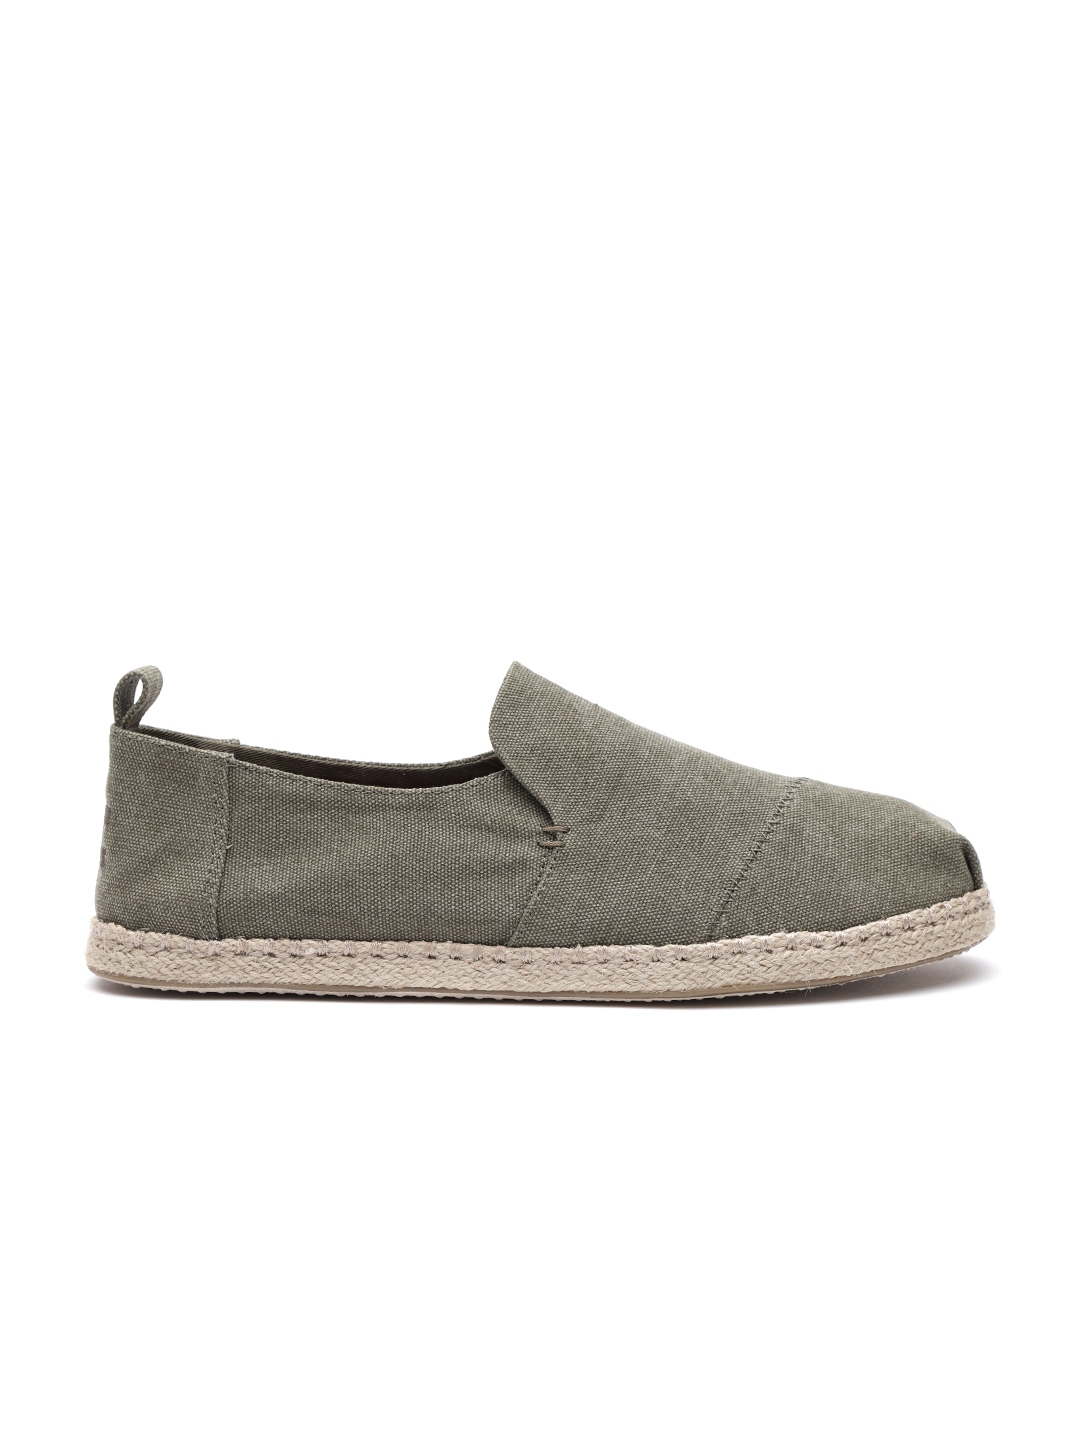 olive green toms shoes